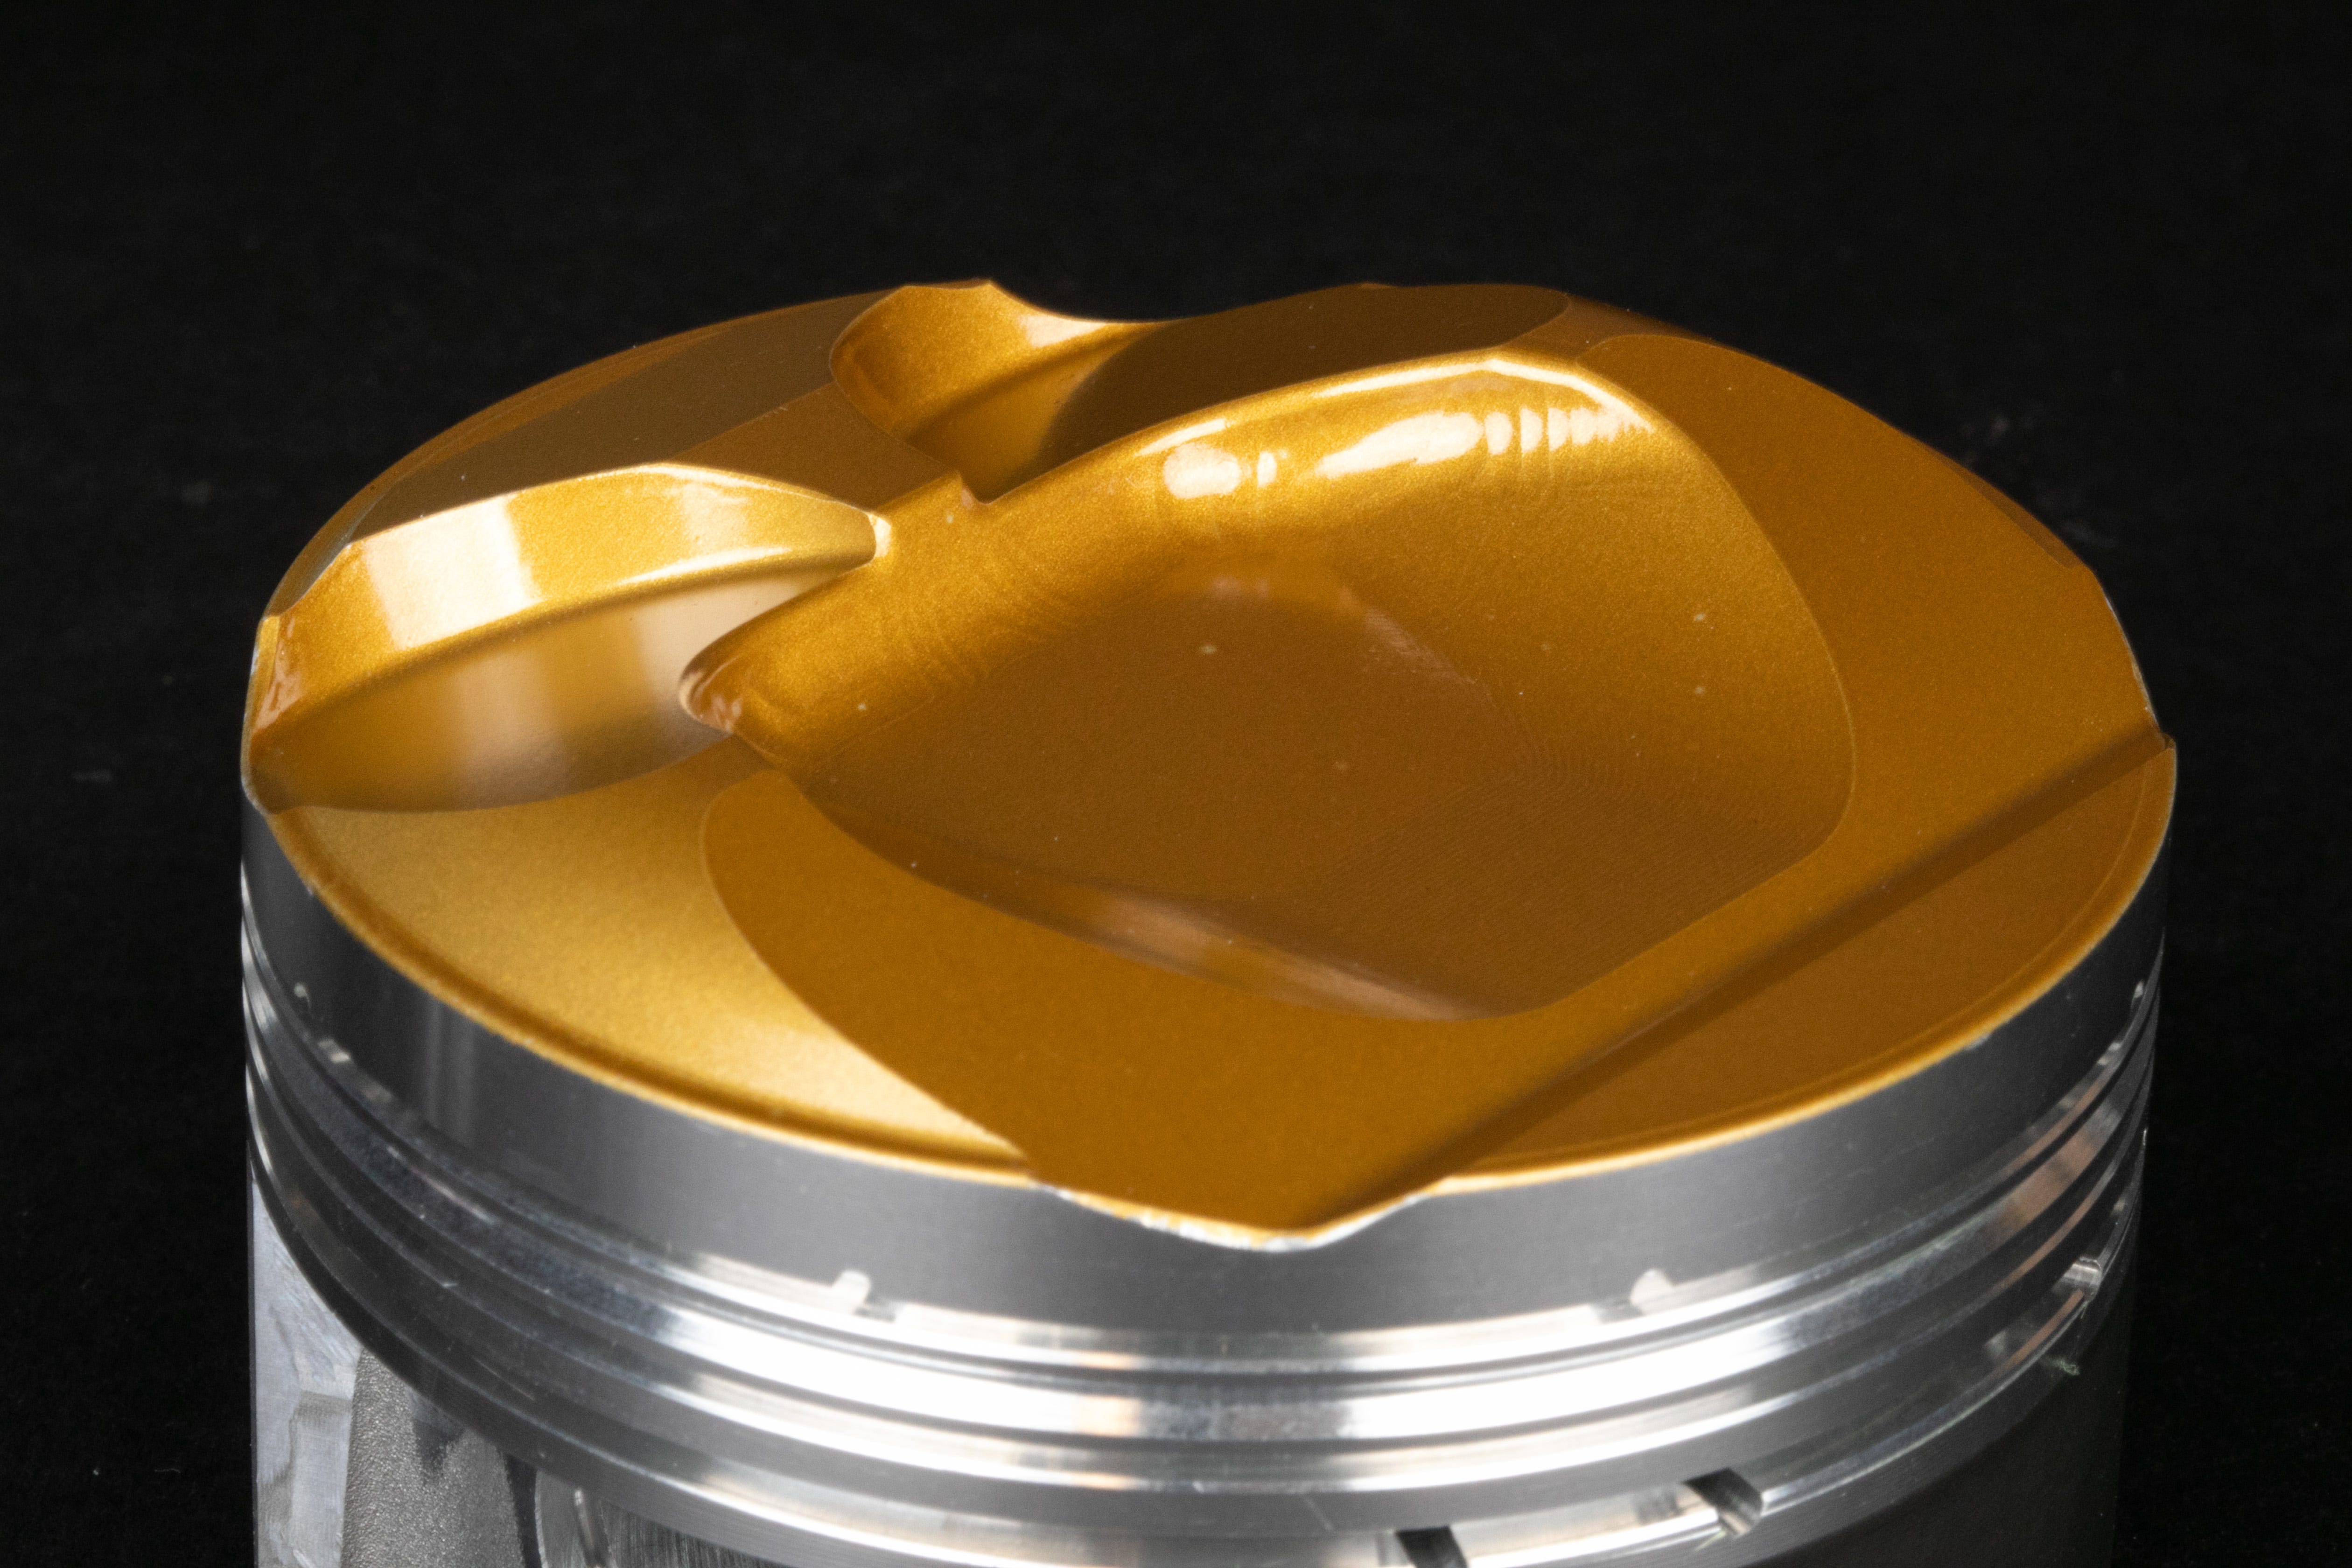 EcoBoost piston crown direct injection